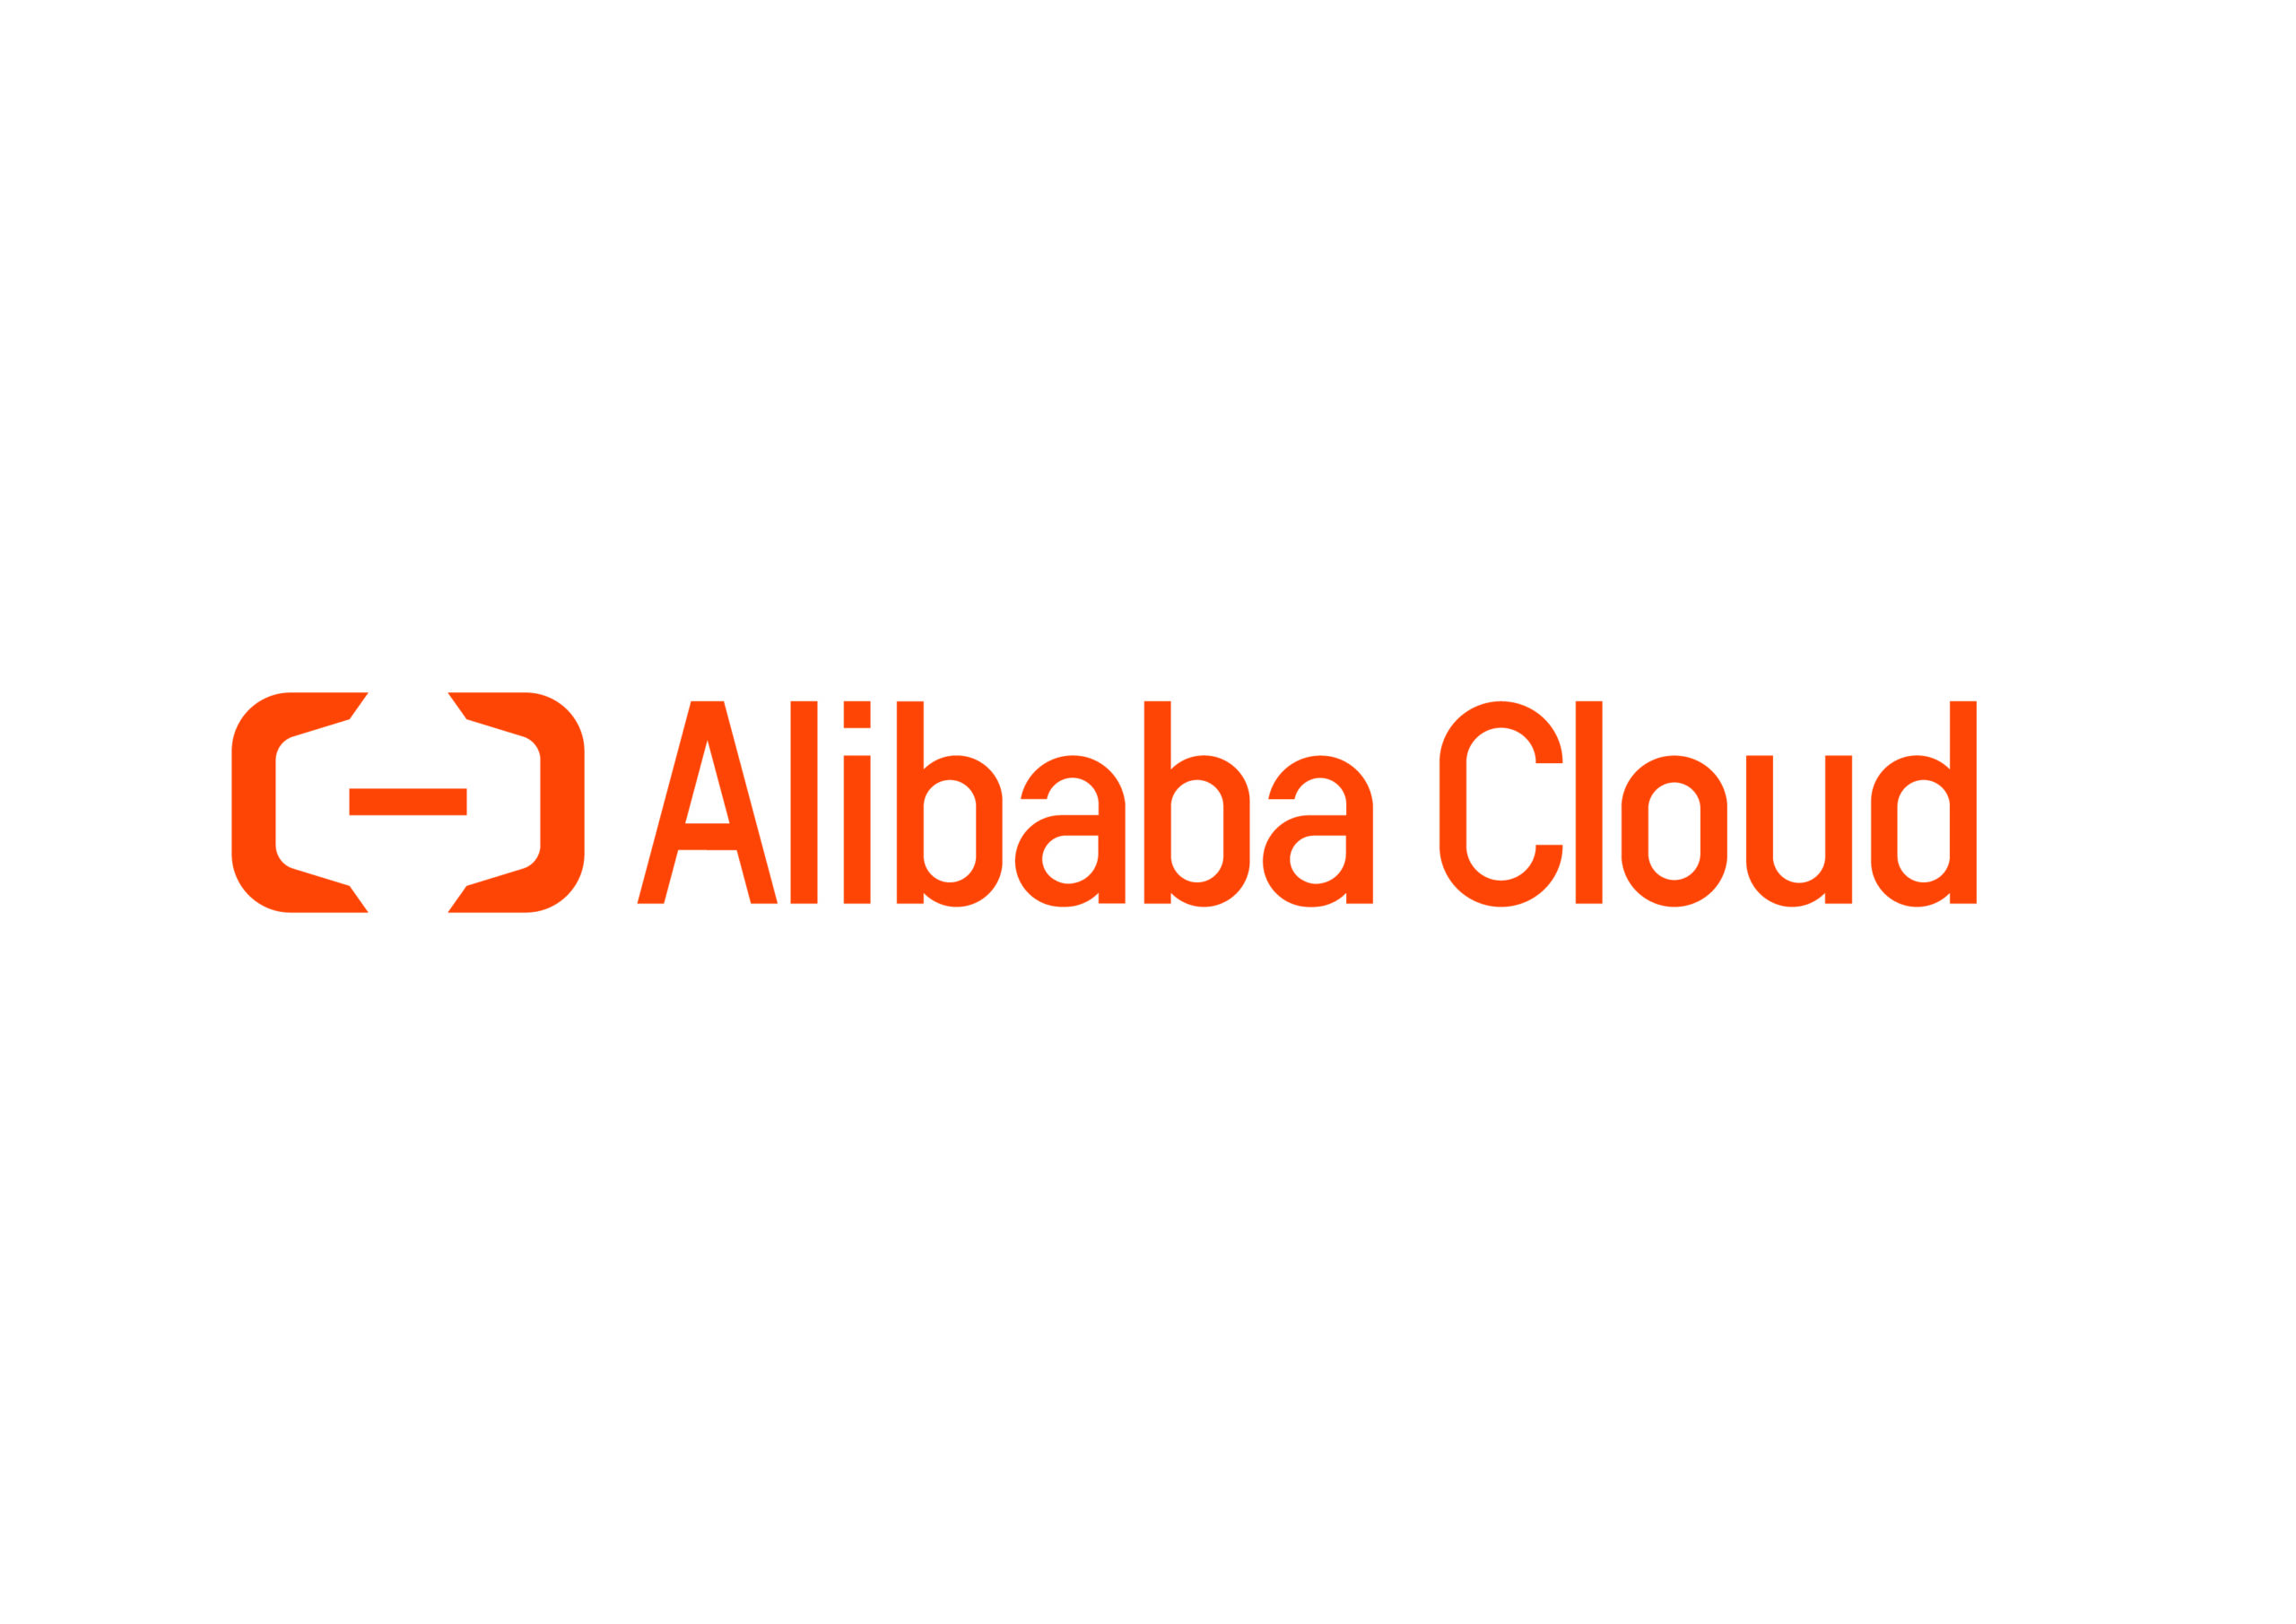 https://thaifintech.org/wp-content/uploads/2022/02/Alibaba-cloud_logo-scaled.jpg